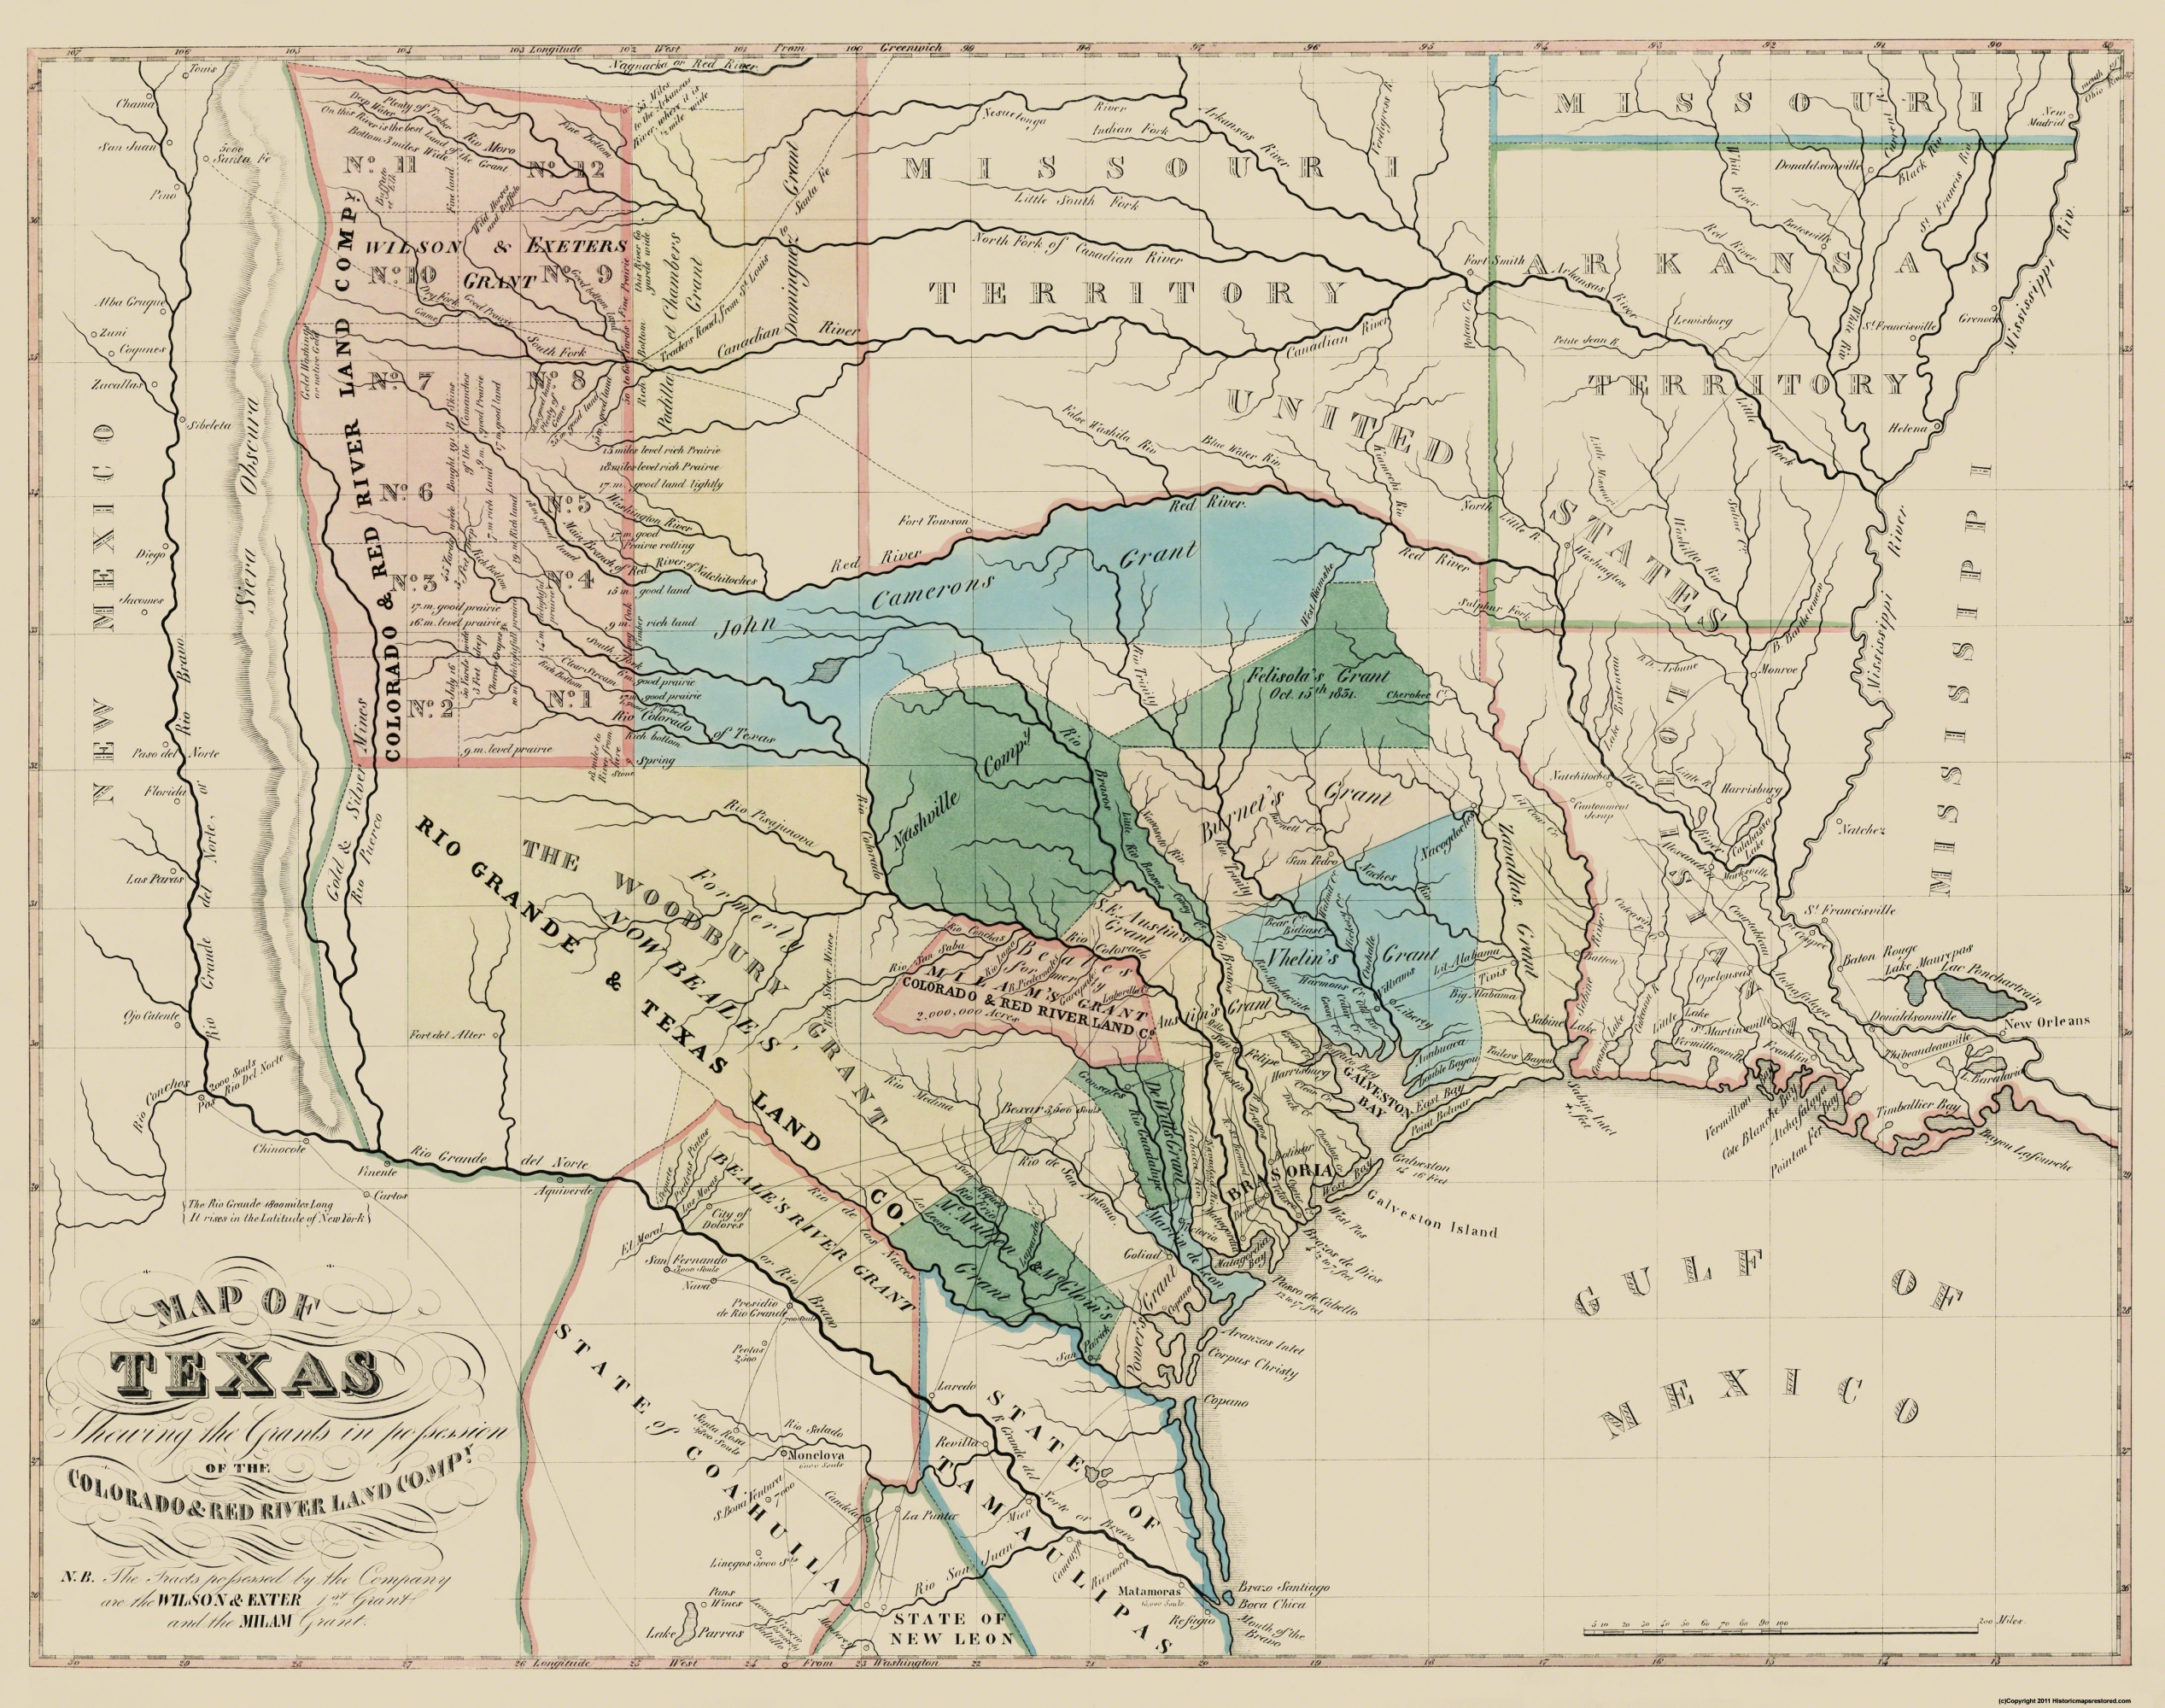 Old Map - Texas, Colorado, Red River Land Grants 1821 - Texas Land Grants Map